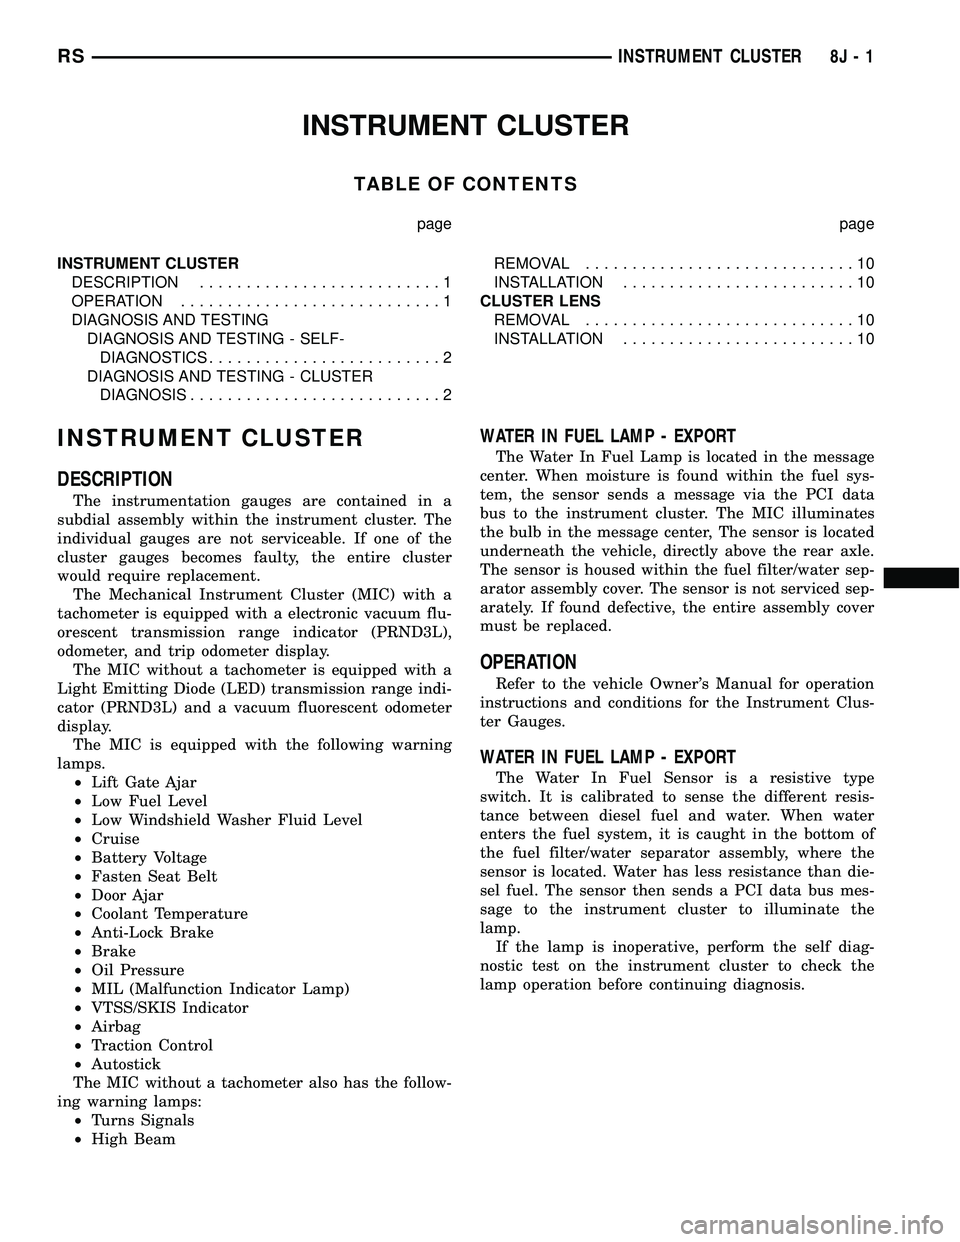 CHRYSLER VOYAGER 2004  Service Manual INSTRUMENT CLUSTER
TABLE OF CONTENTS
page page
INSTRUMENT CLUSTER
DESCRIPTION..........................1
OPERATION............................1
DIAGNOSIS AND TESTING
DIAGNOSIS AND TESTING - SELF-
DIAG